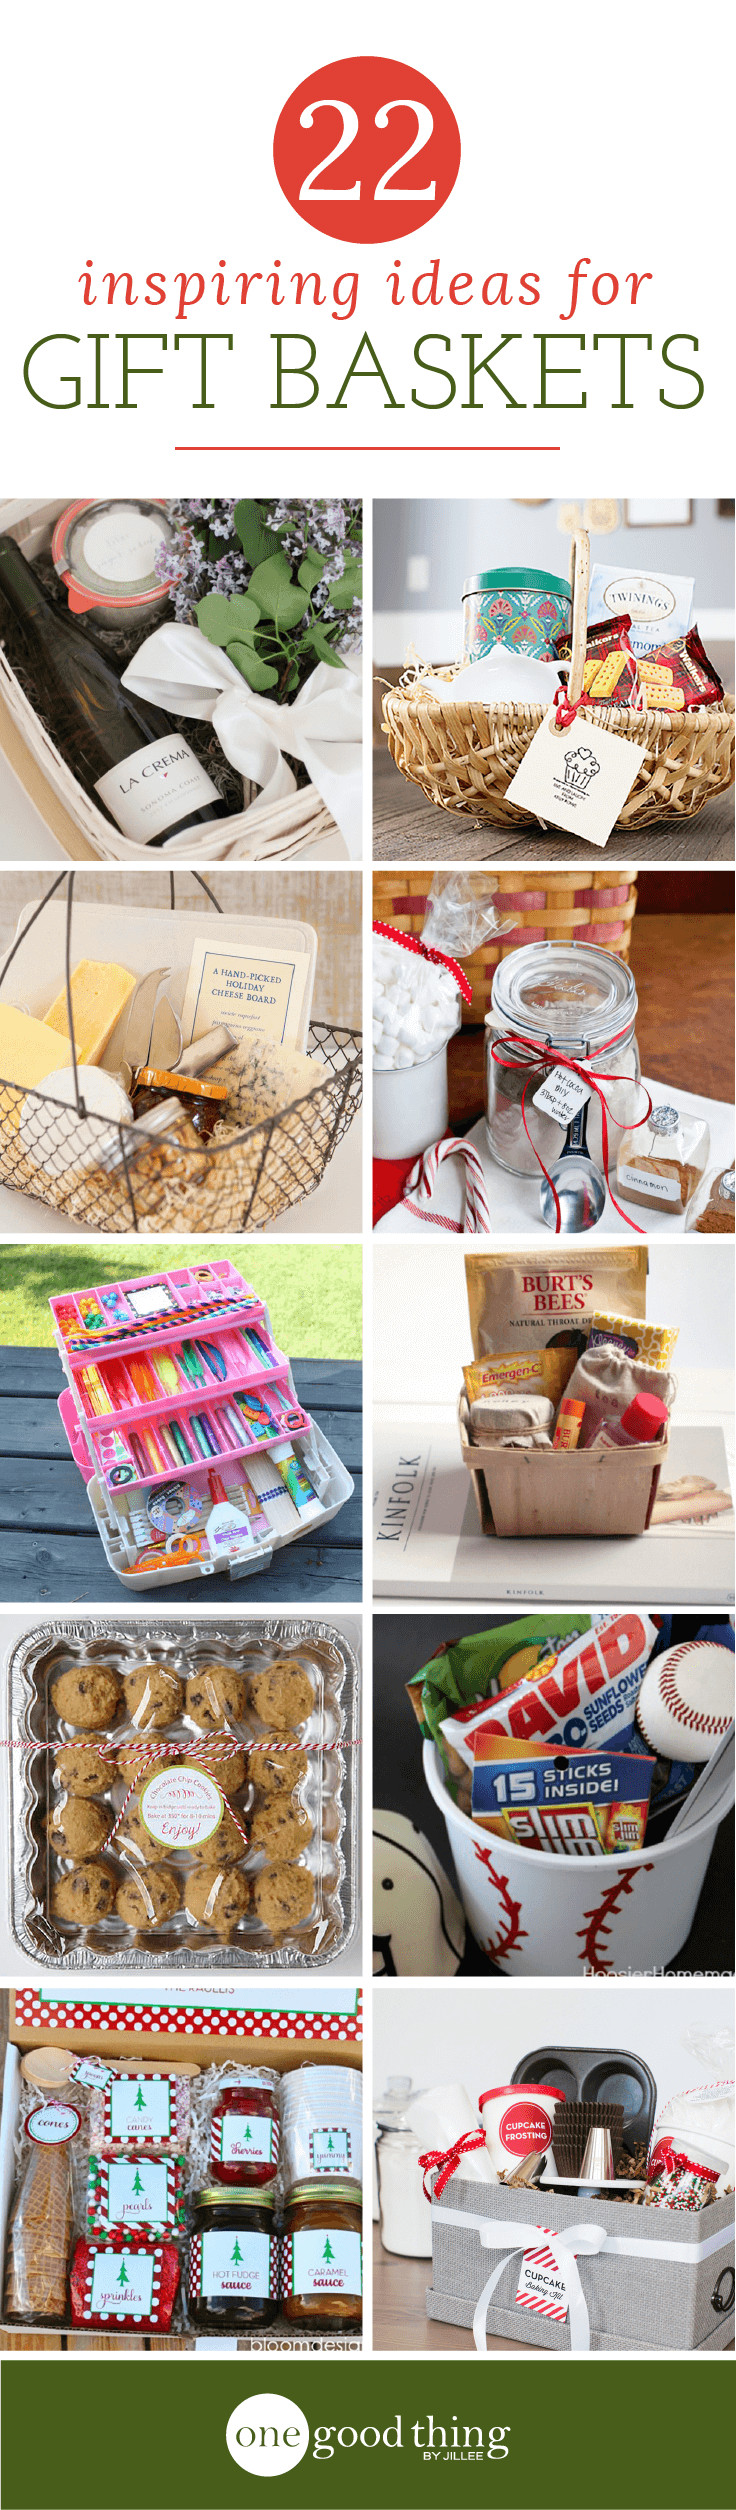 Gift Basket Ideas For Couple
 Pin on e Good Thing